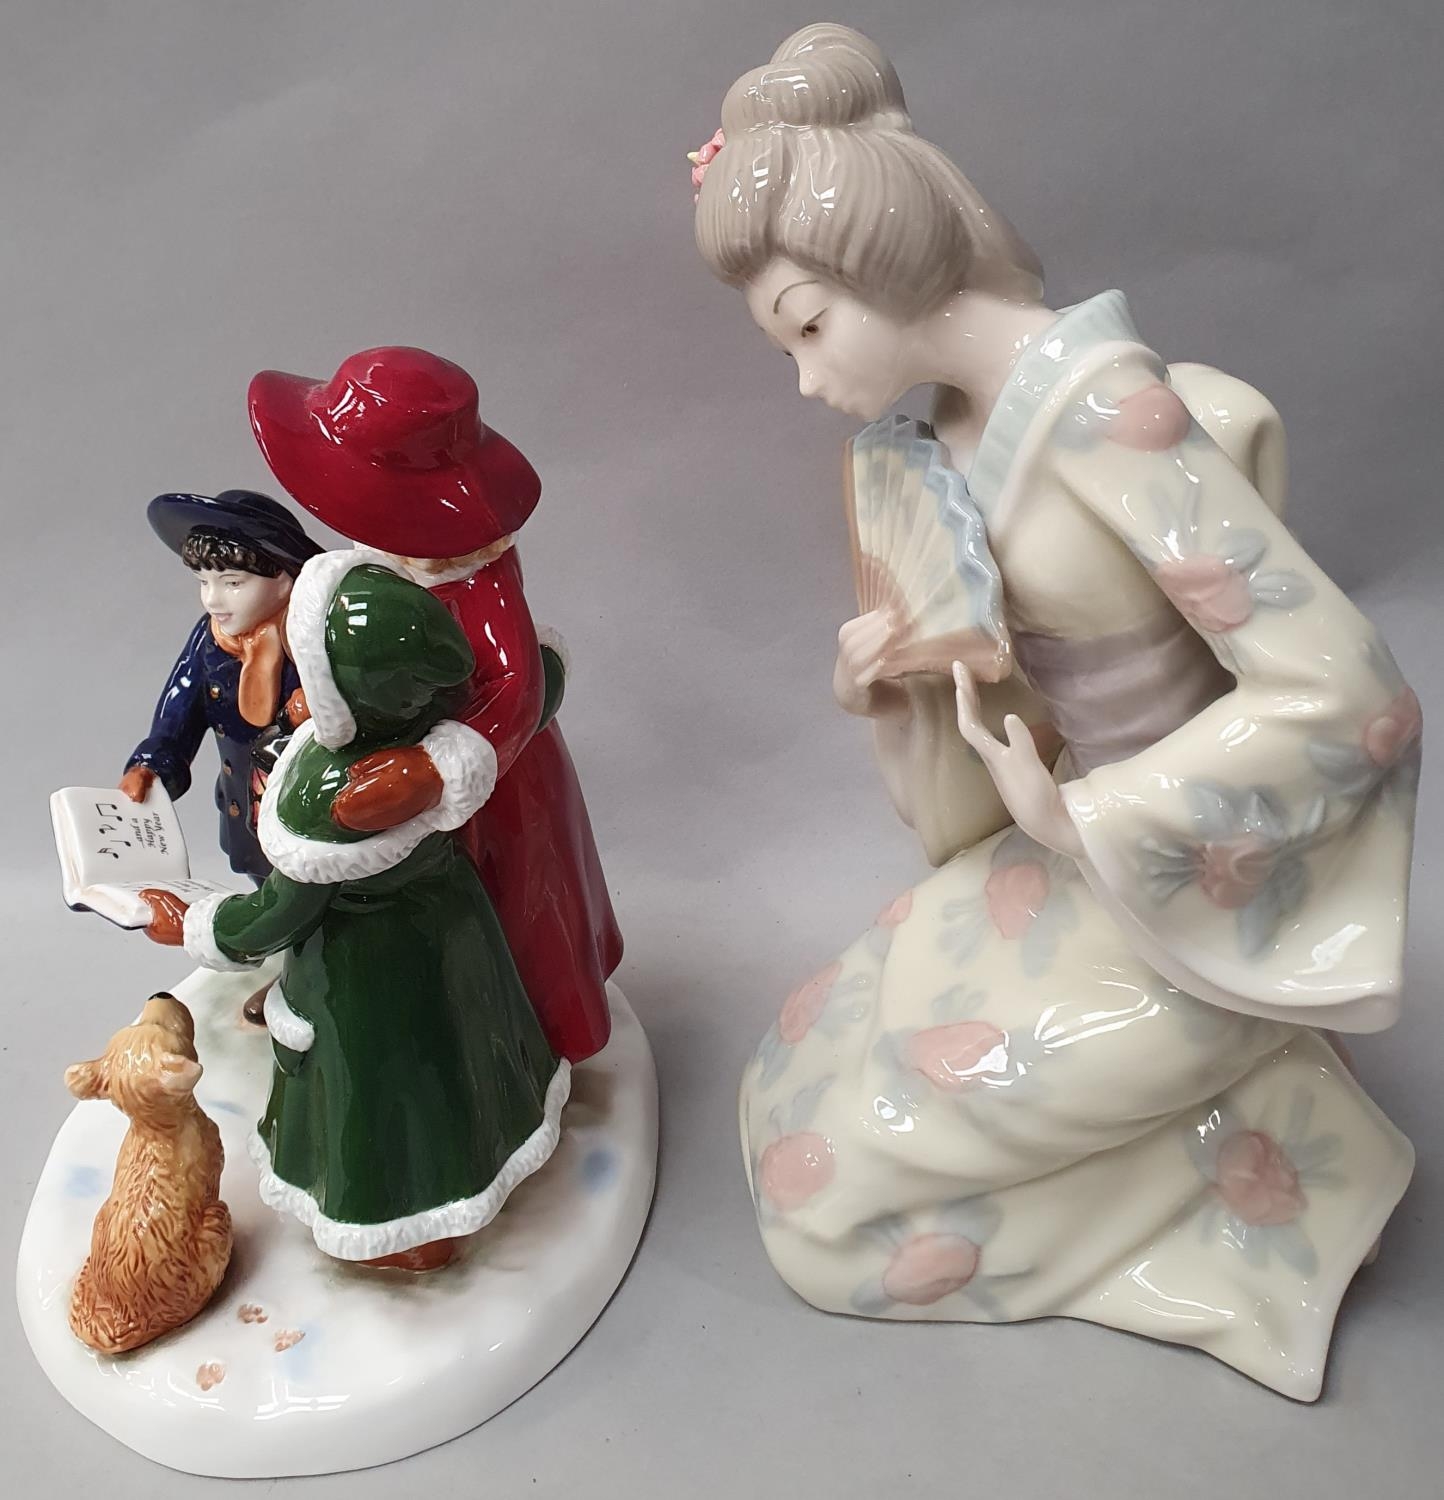 "Glad Tidings" Limited edition figurine 259/300 with certificate together with Geisha girl figurine. - Image 2 of 5